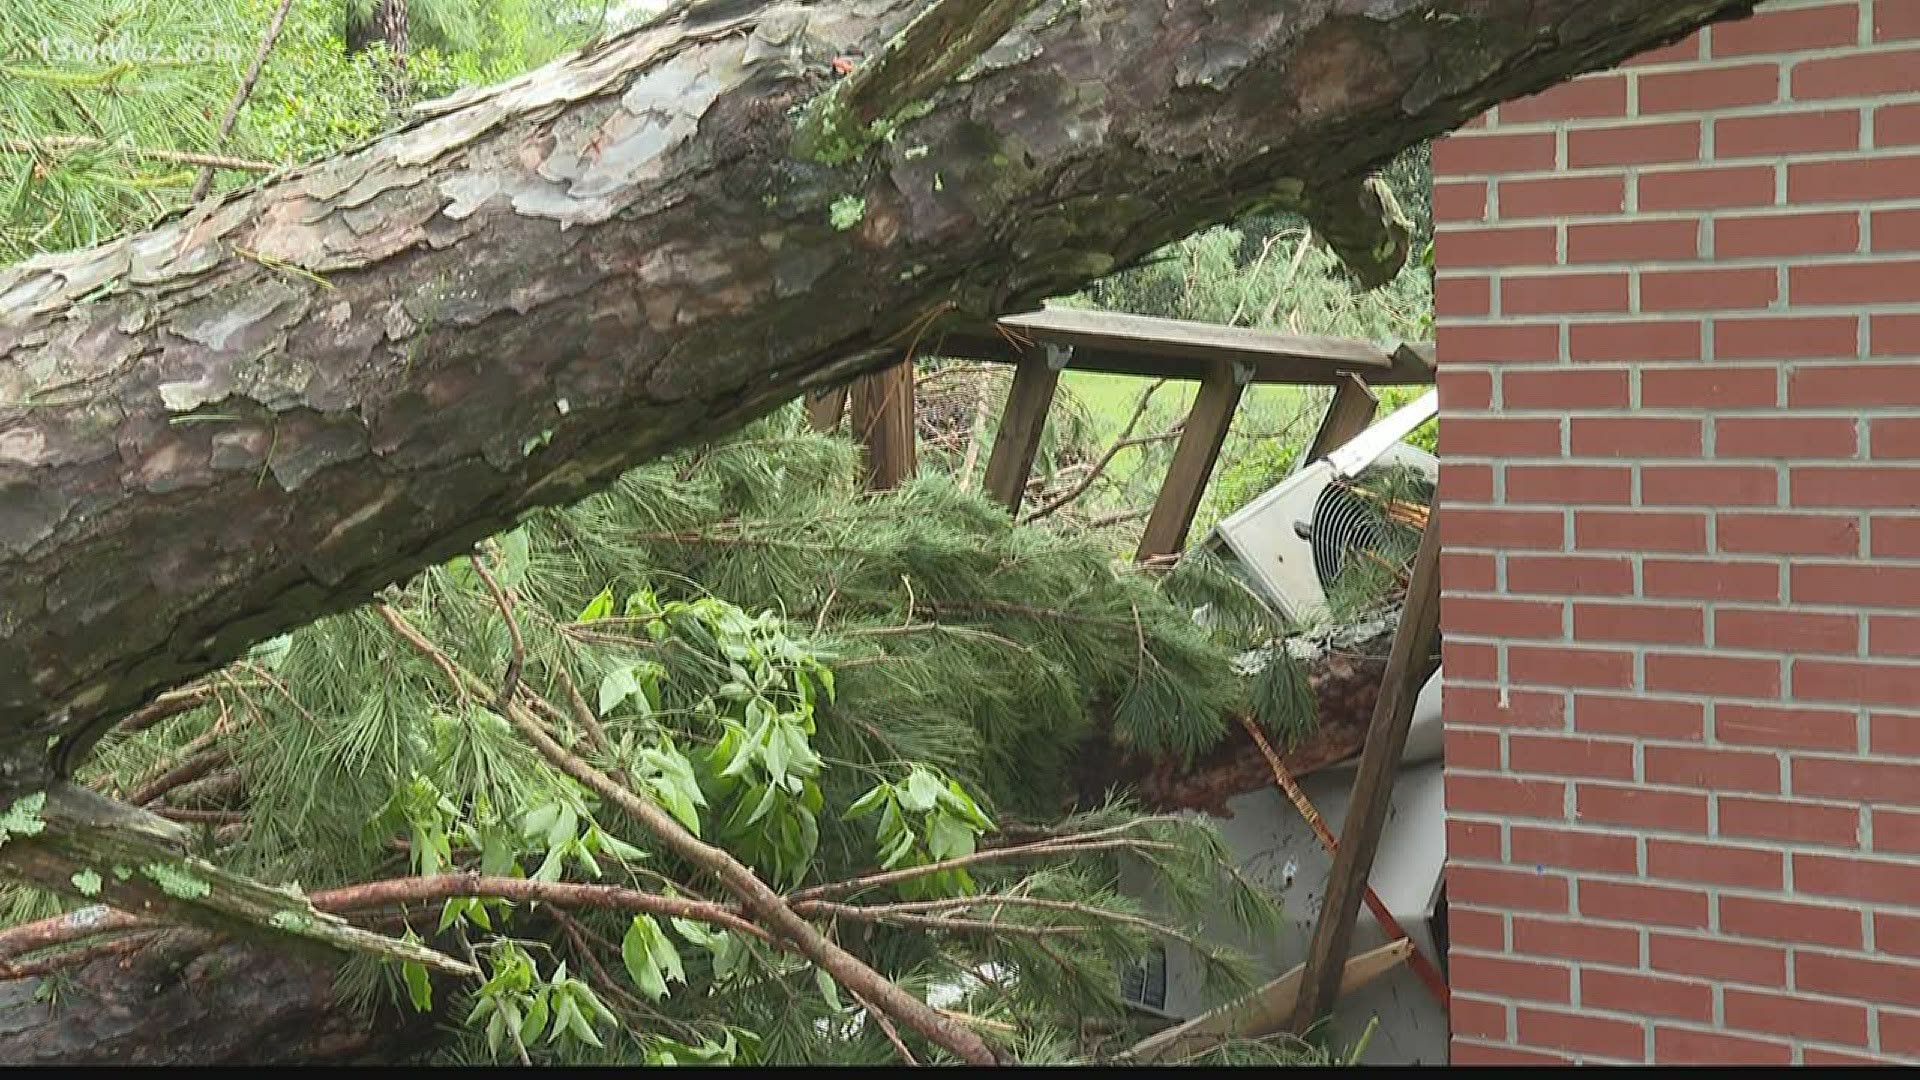 One of the hardest hit areas in Sunday's storm is Hawkinsville, where several falling trees damaged homes and cars.